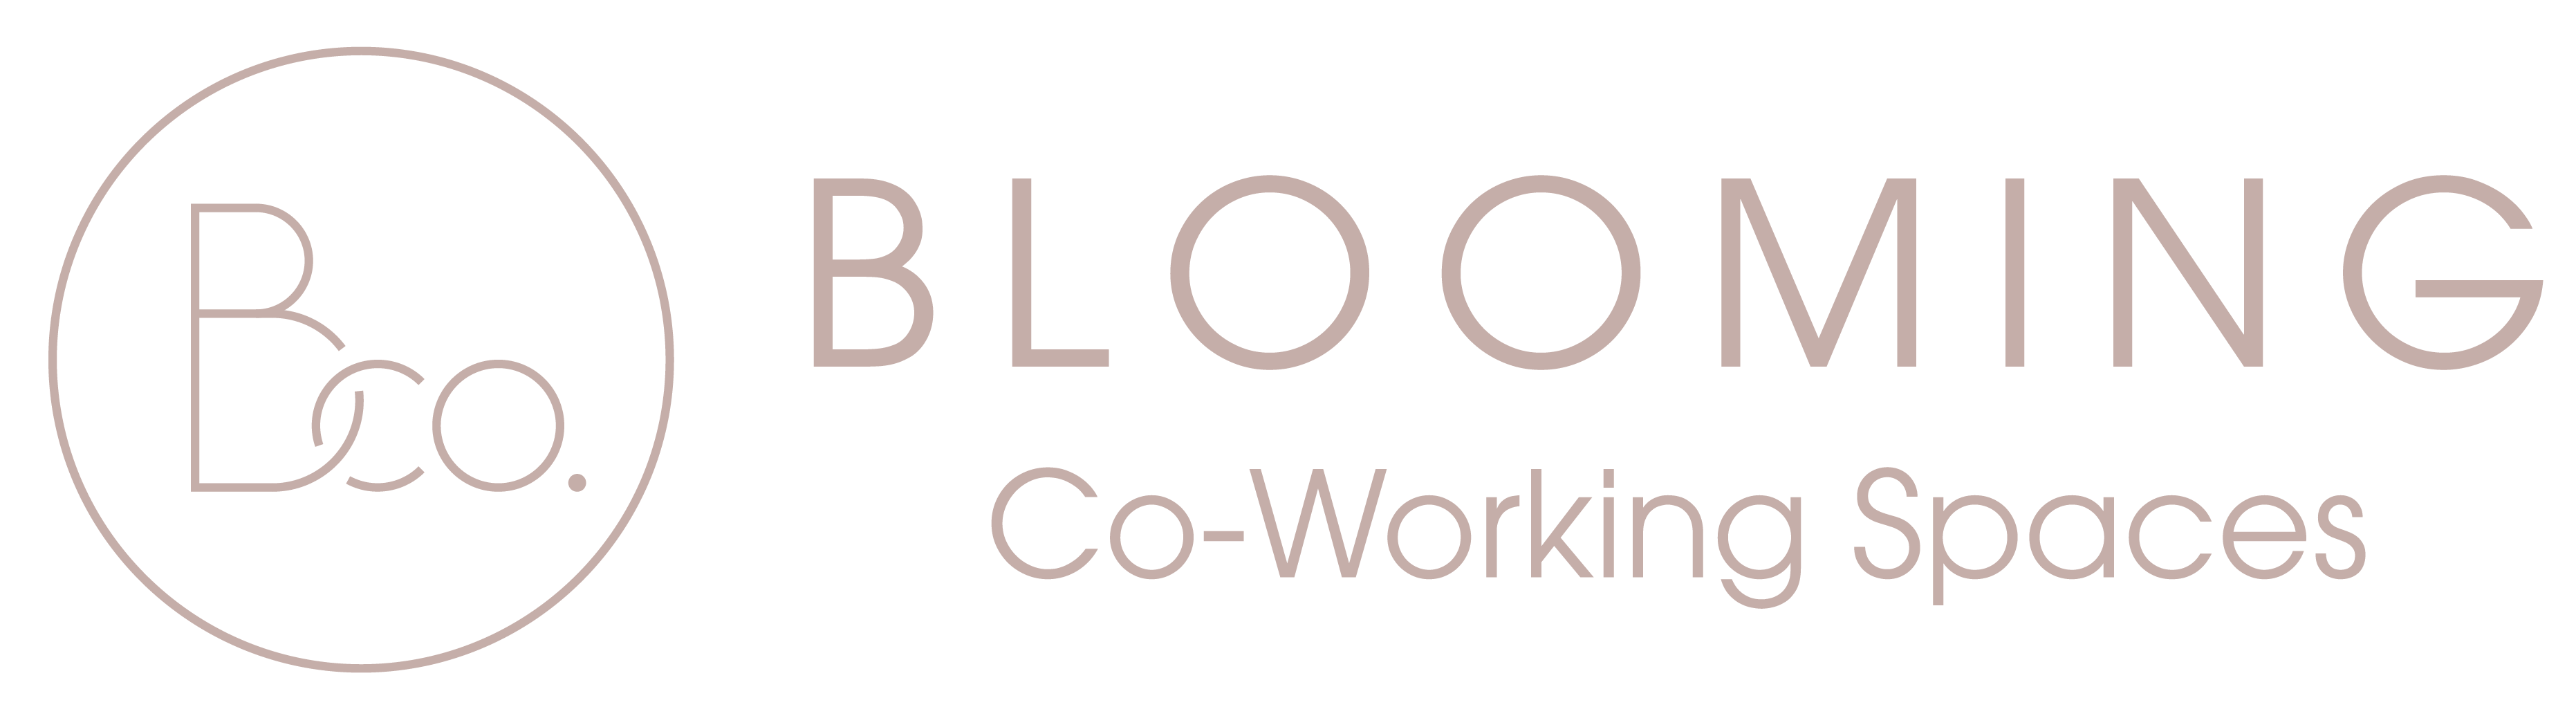 Blooming Co-working Space